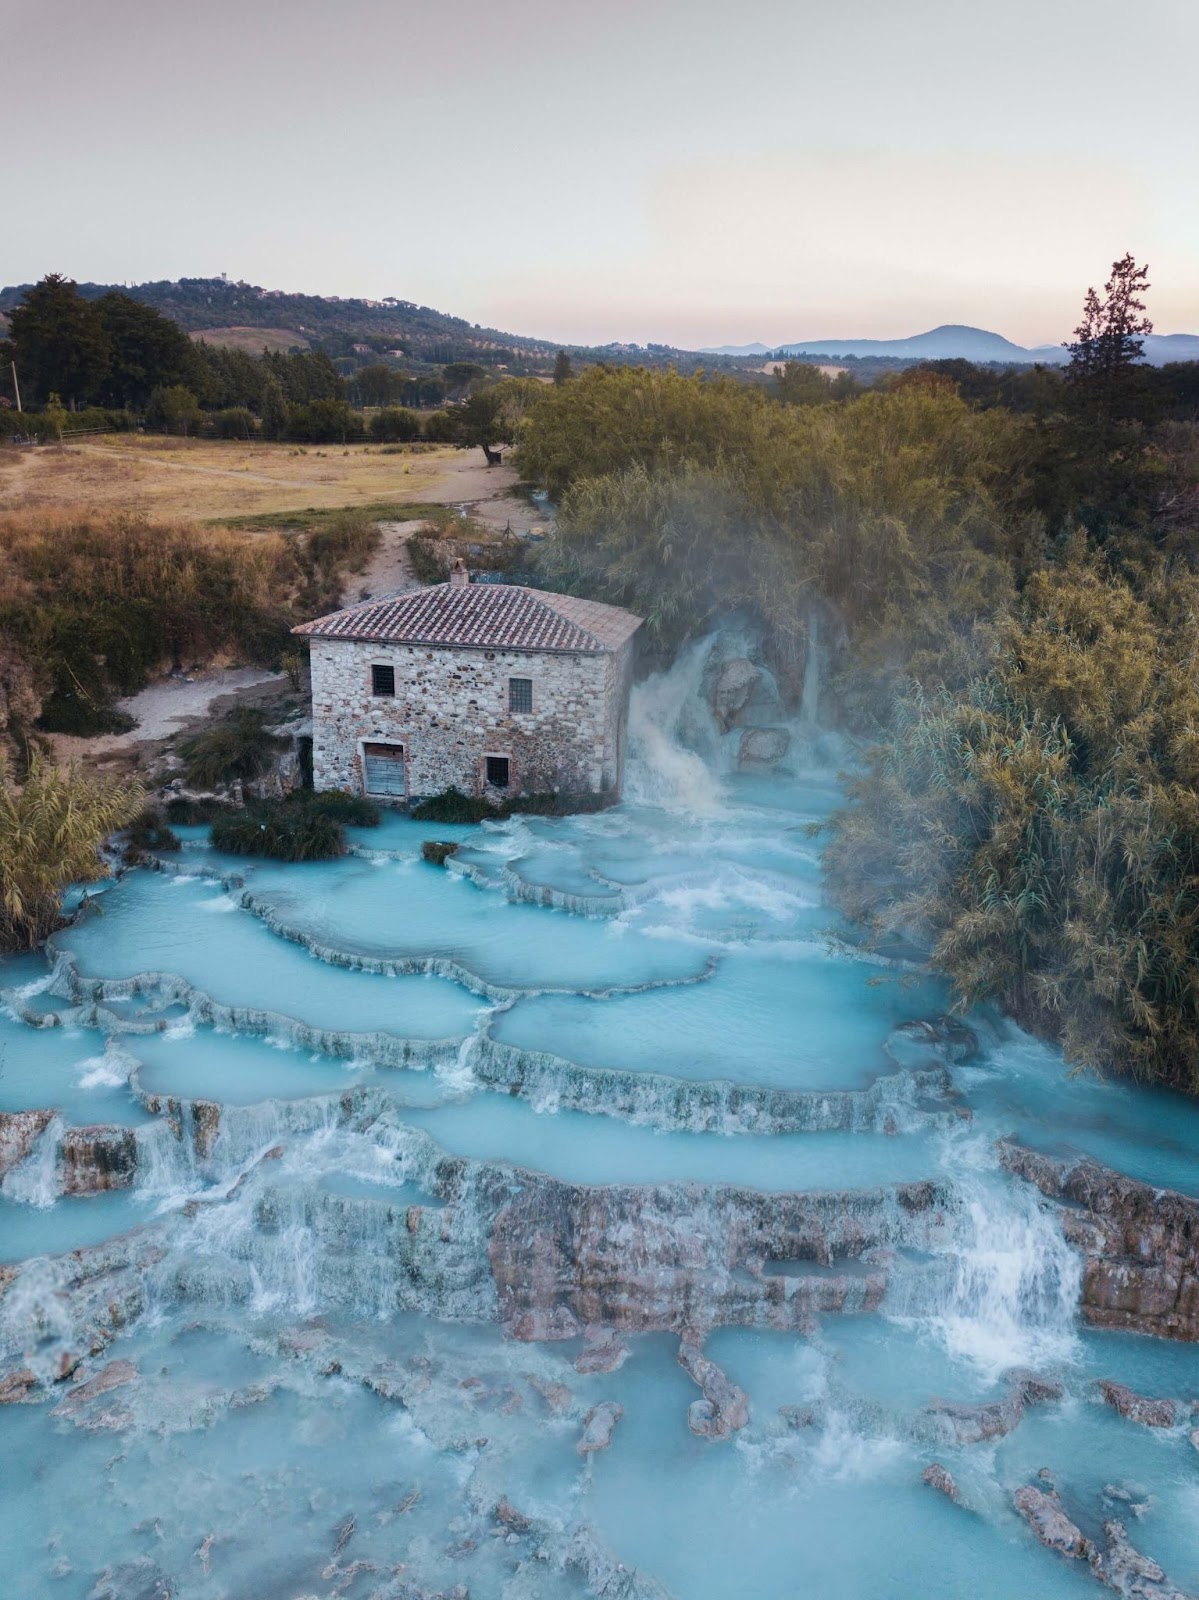 off the beaten path Italy, cascate del mulino, Saturnia hot springs